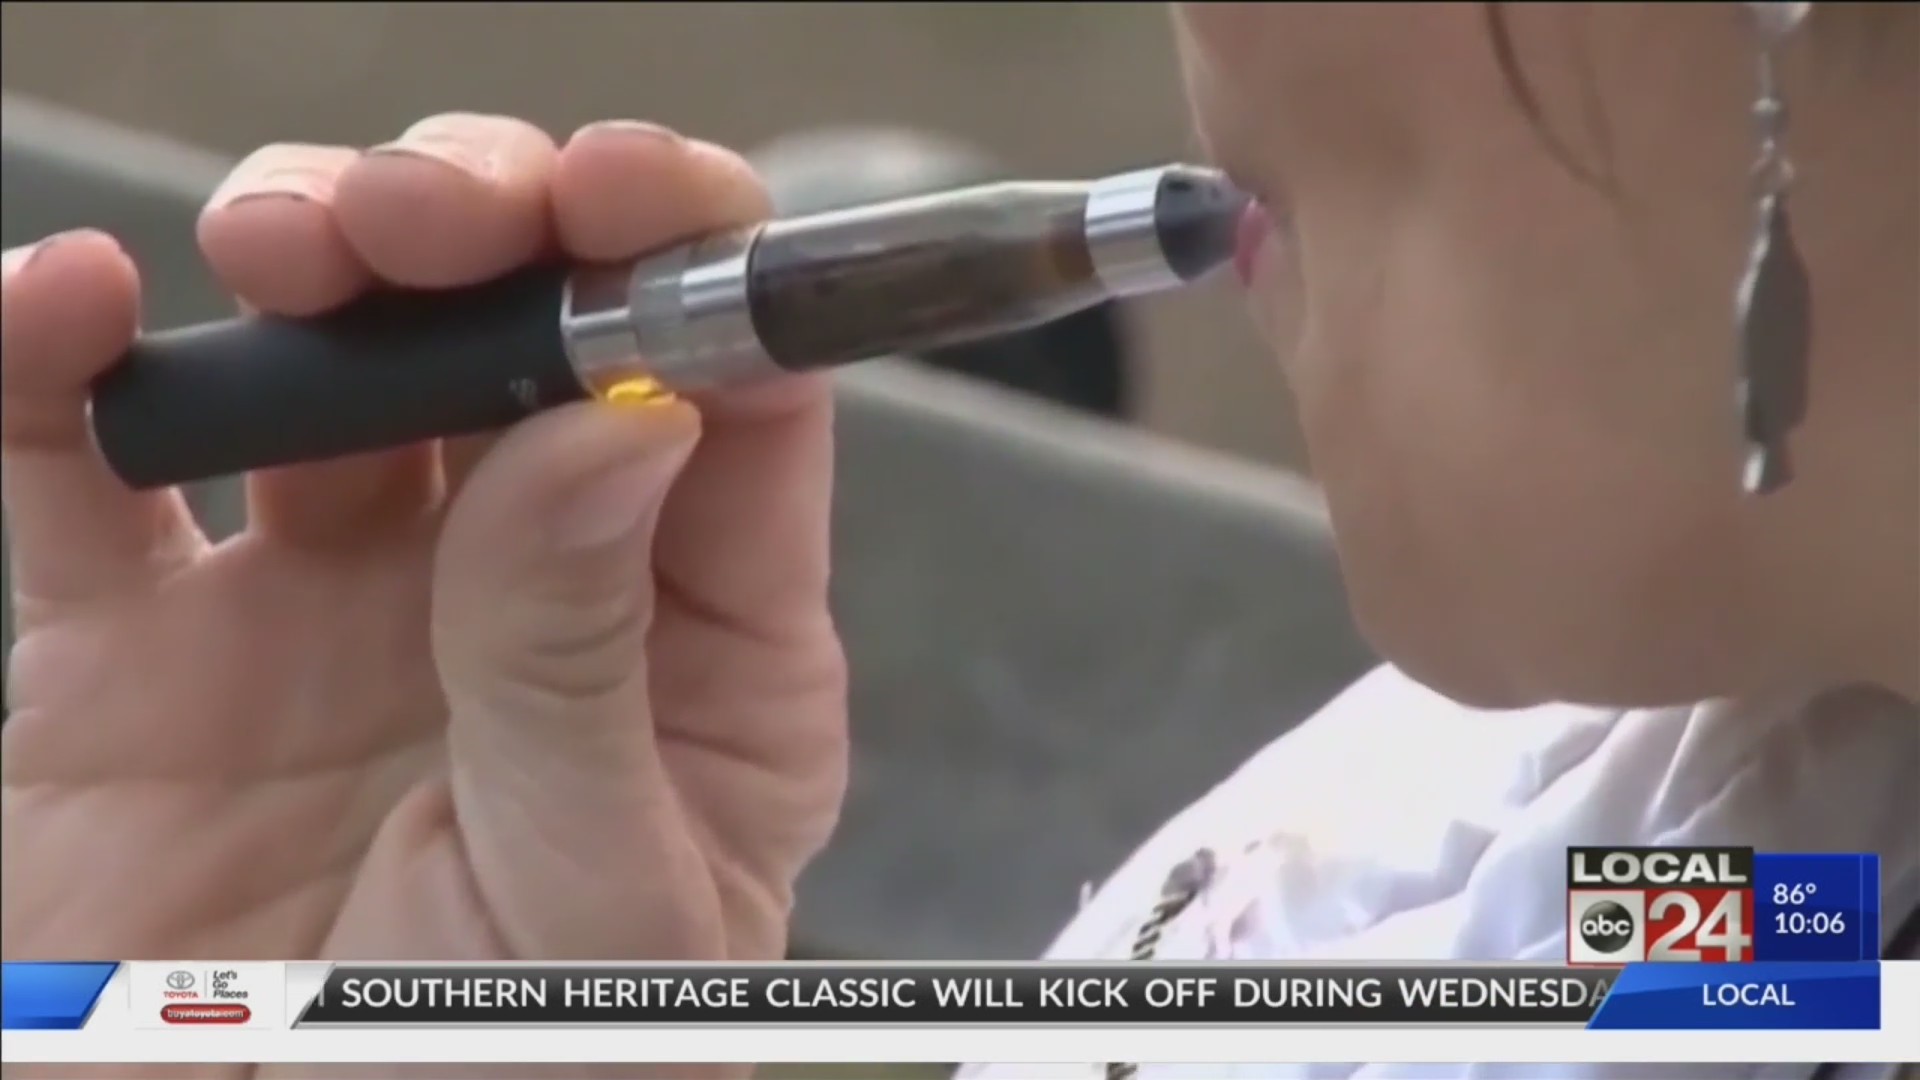 More than 450 people became sick after vaping or using e-cigarettes